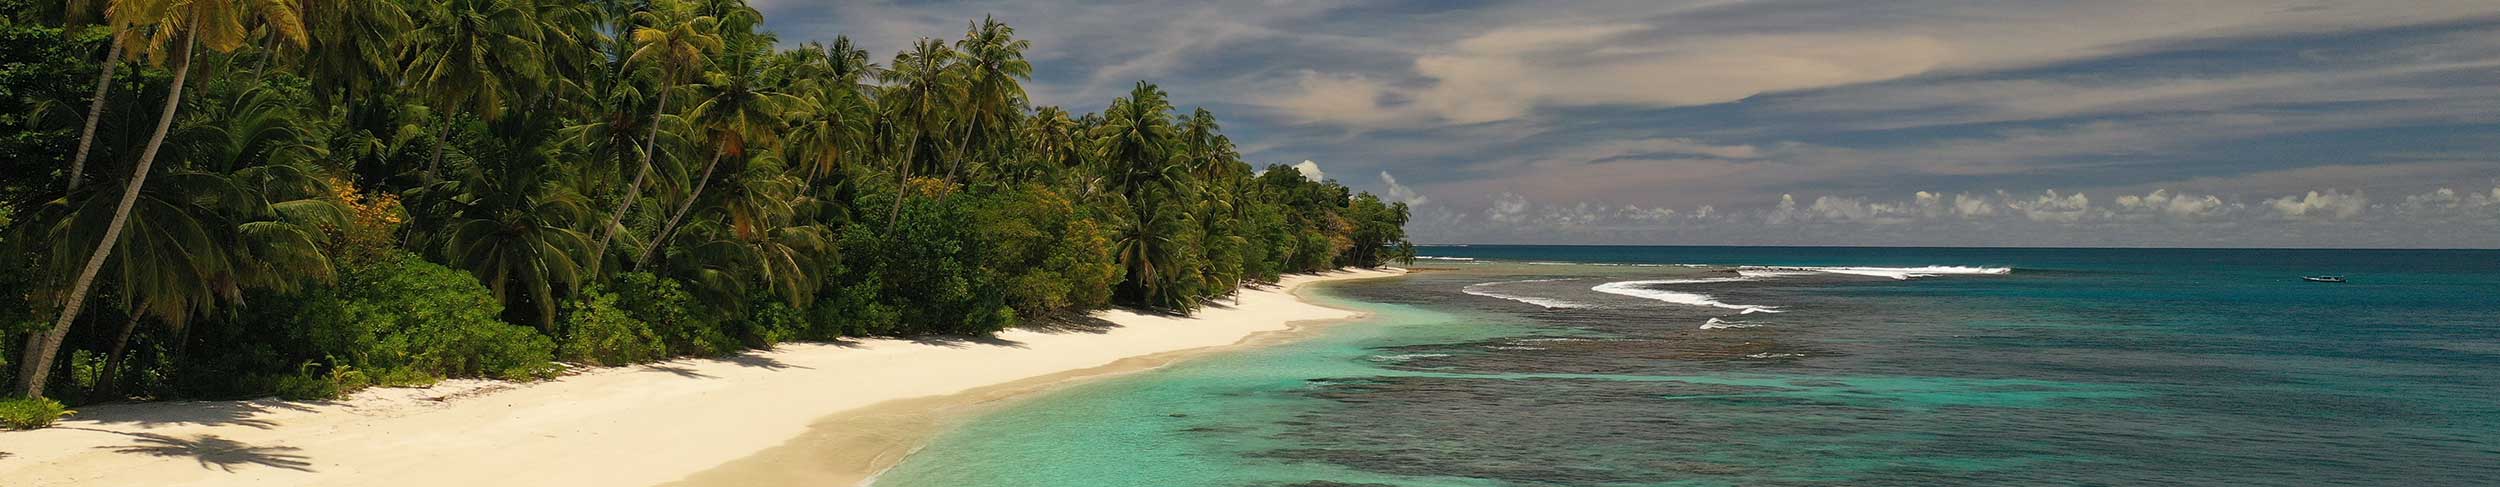 WavePark Mentawai beaches are perfect for snorkeling, swimming, and paddleboarding.